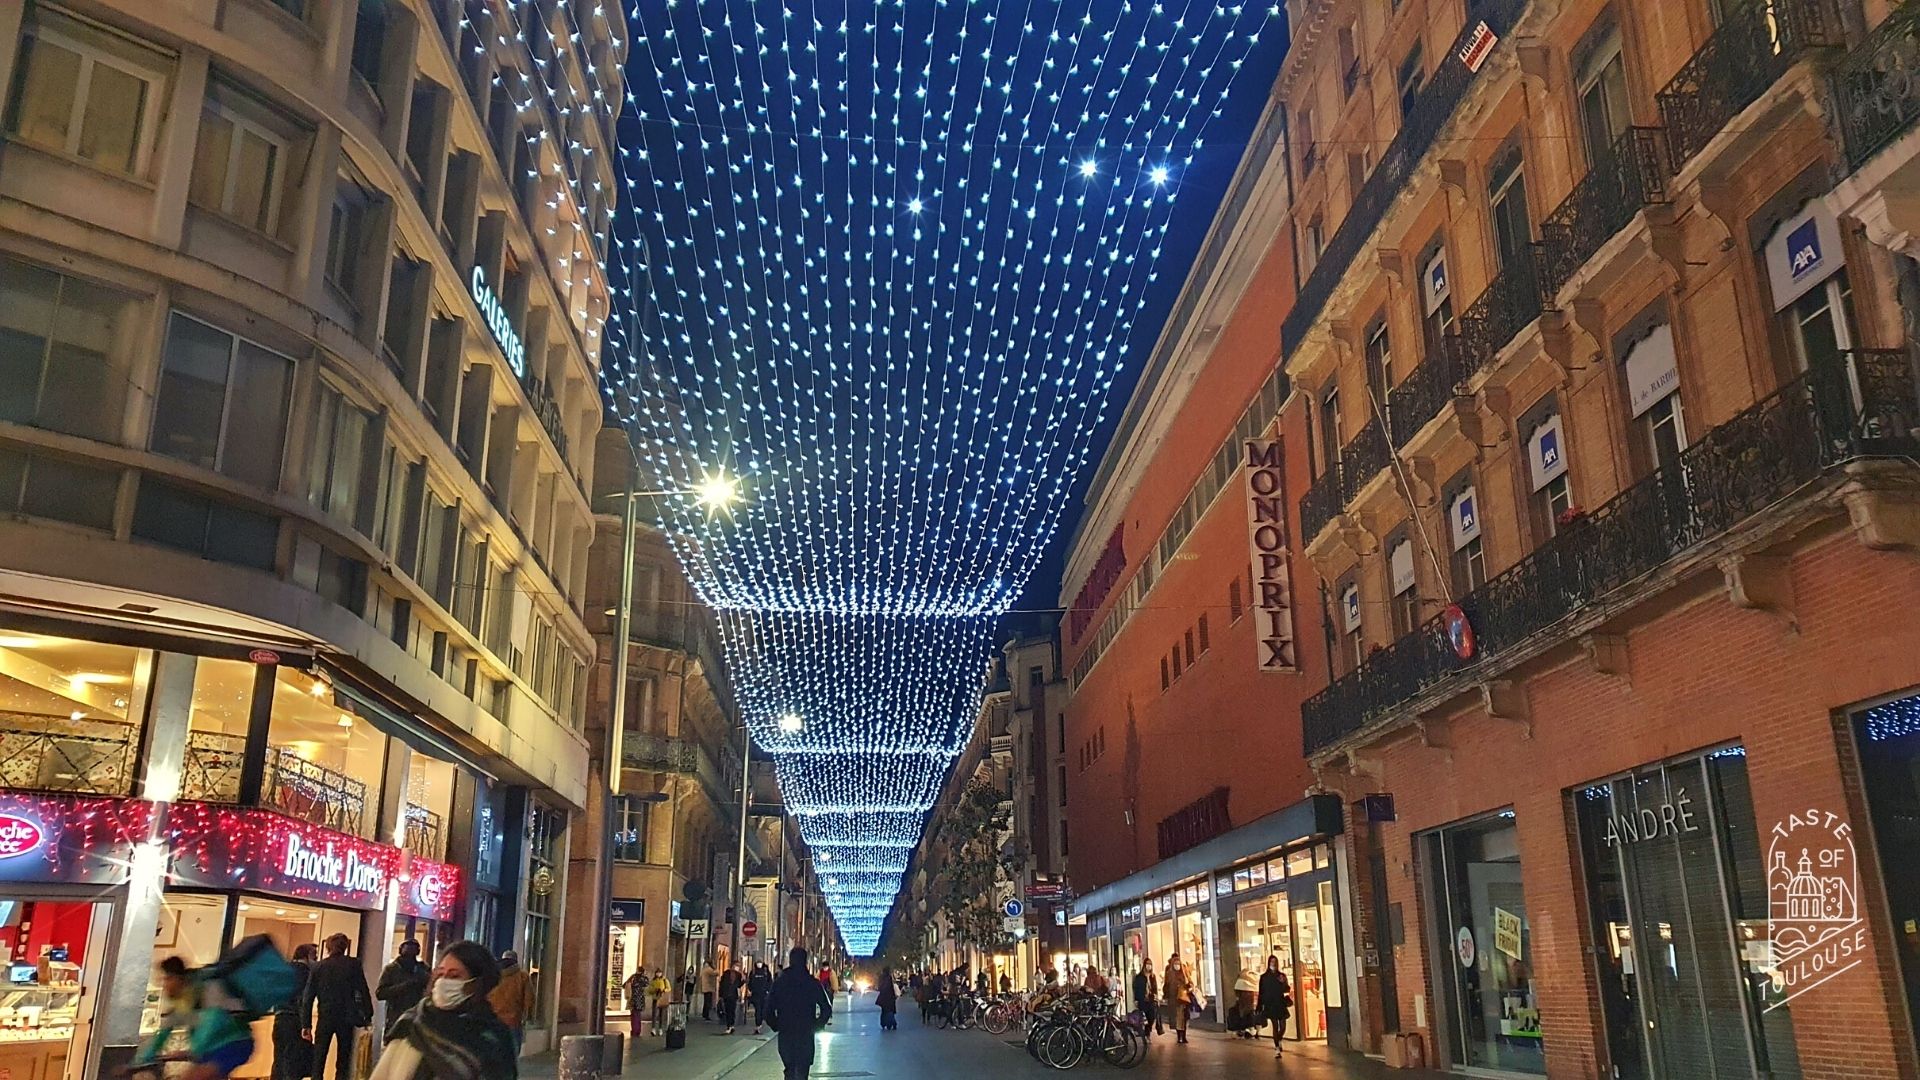 Christmas on the Rue d'Alsace Lorraine, Toulouse.